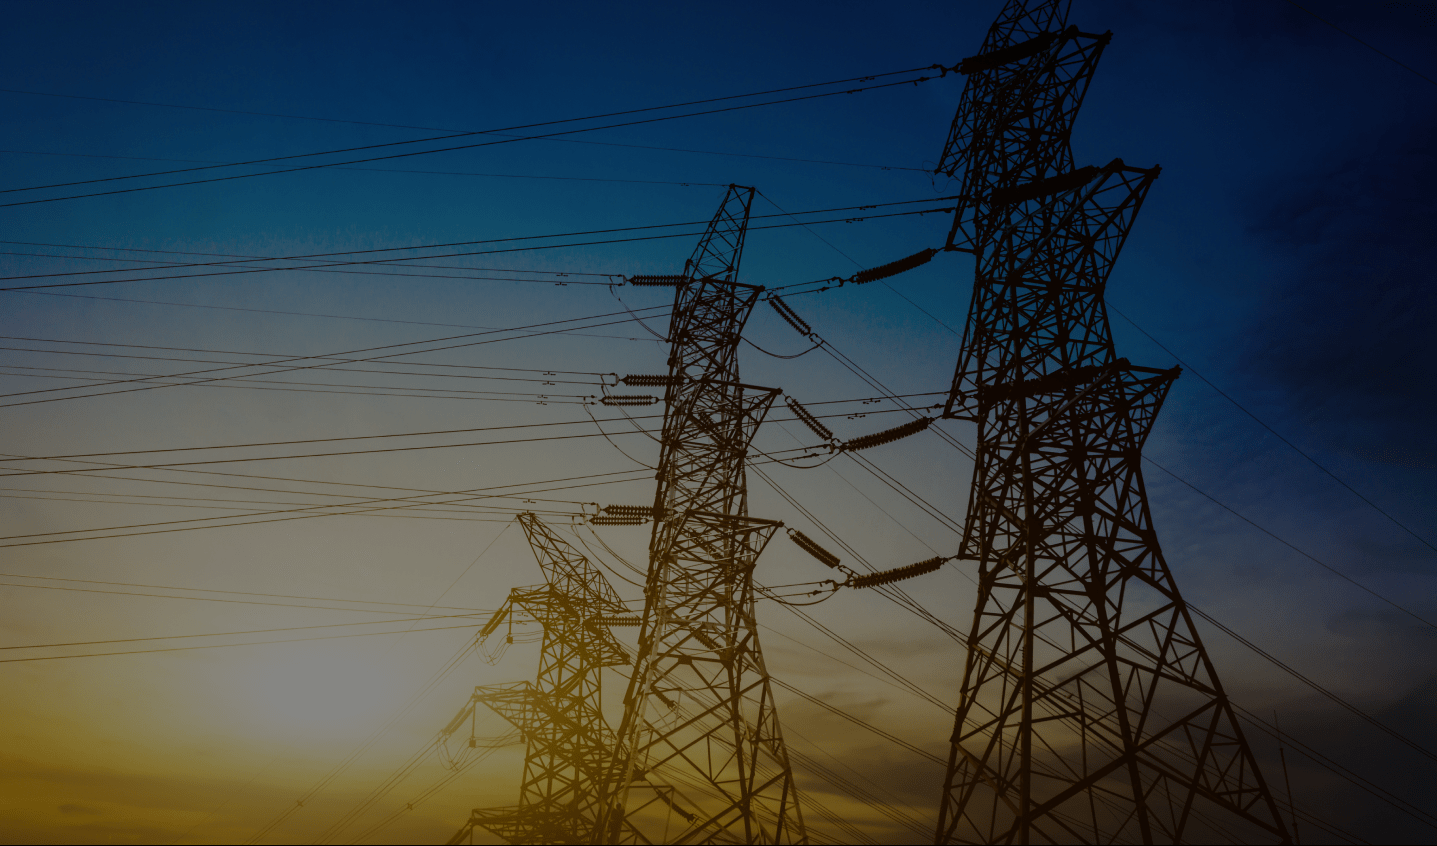 sun-setting-behind-the-silhouette-of-electricity-pylons (1) 3